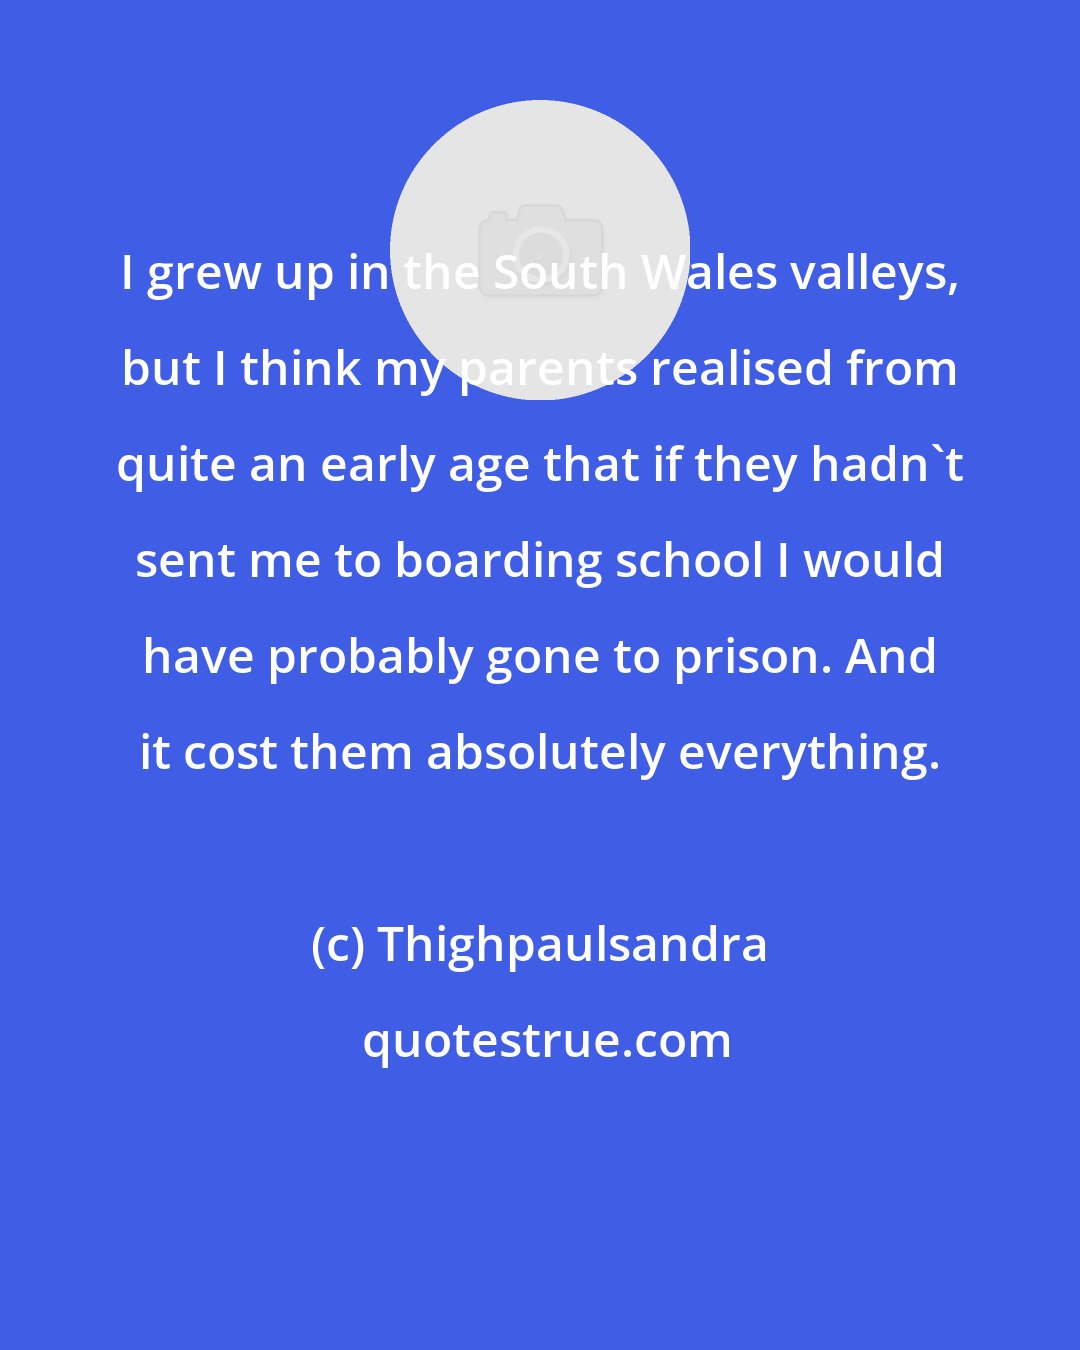 Thighpaulsandra: I grew up in the South Wales valleys, but I think my parents realised from quite an early age that if they hadn't sent me to boarding school I would have probably gone to prison. And it cost them absolutely everything.